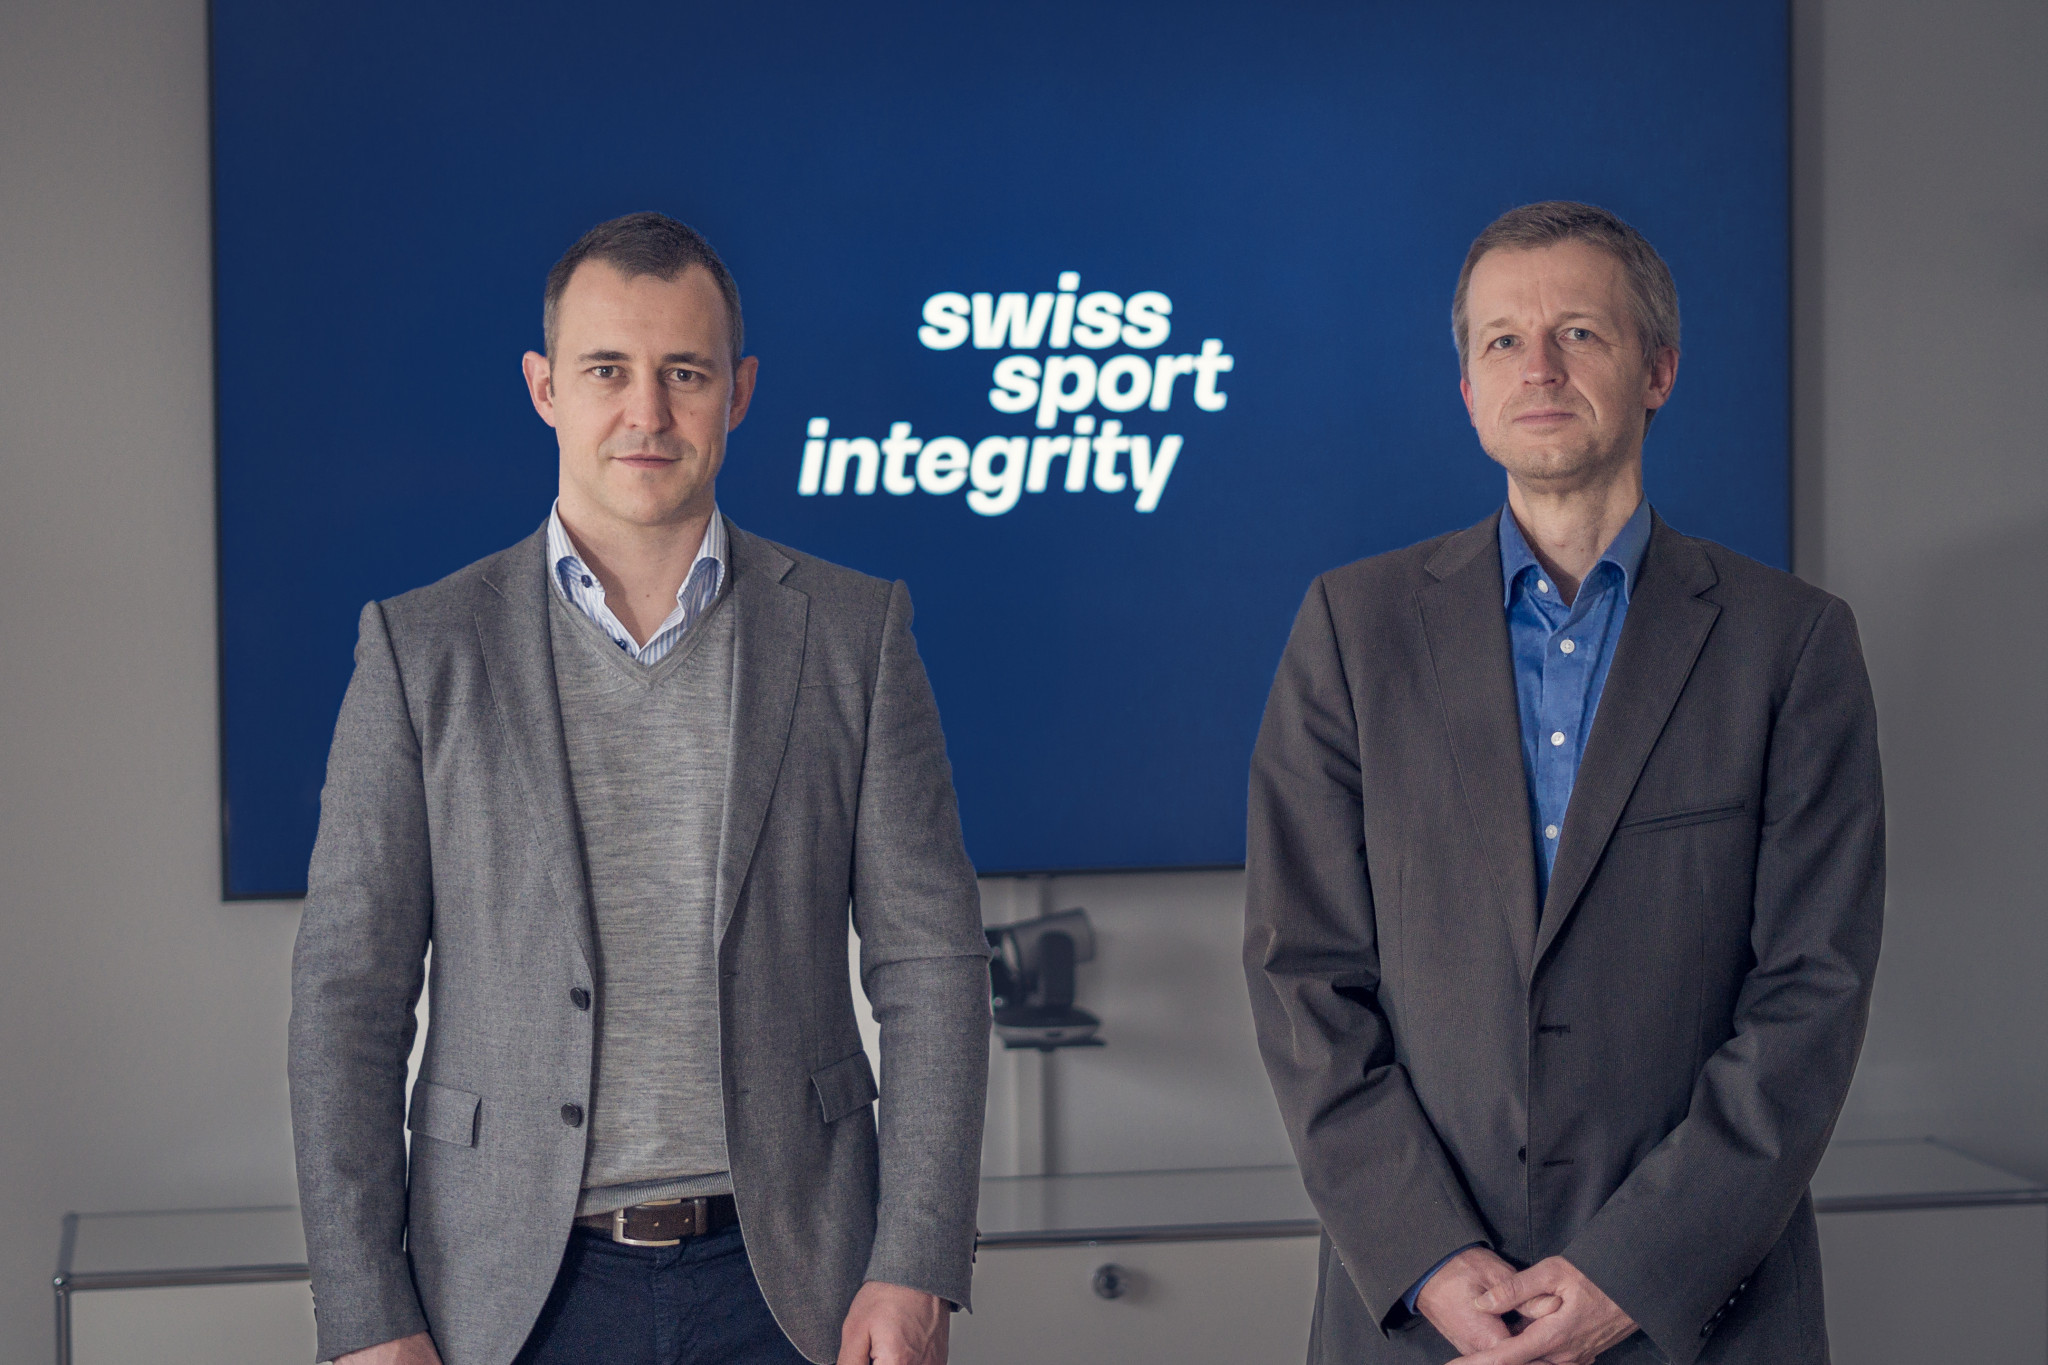 Antidoping Switzerland Foundation to become the Swiss Sport Integrity Foundation